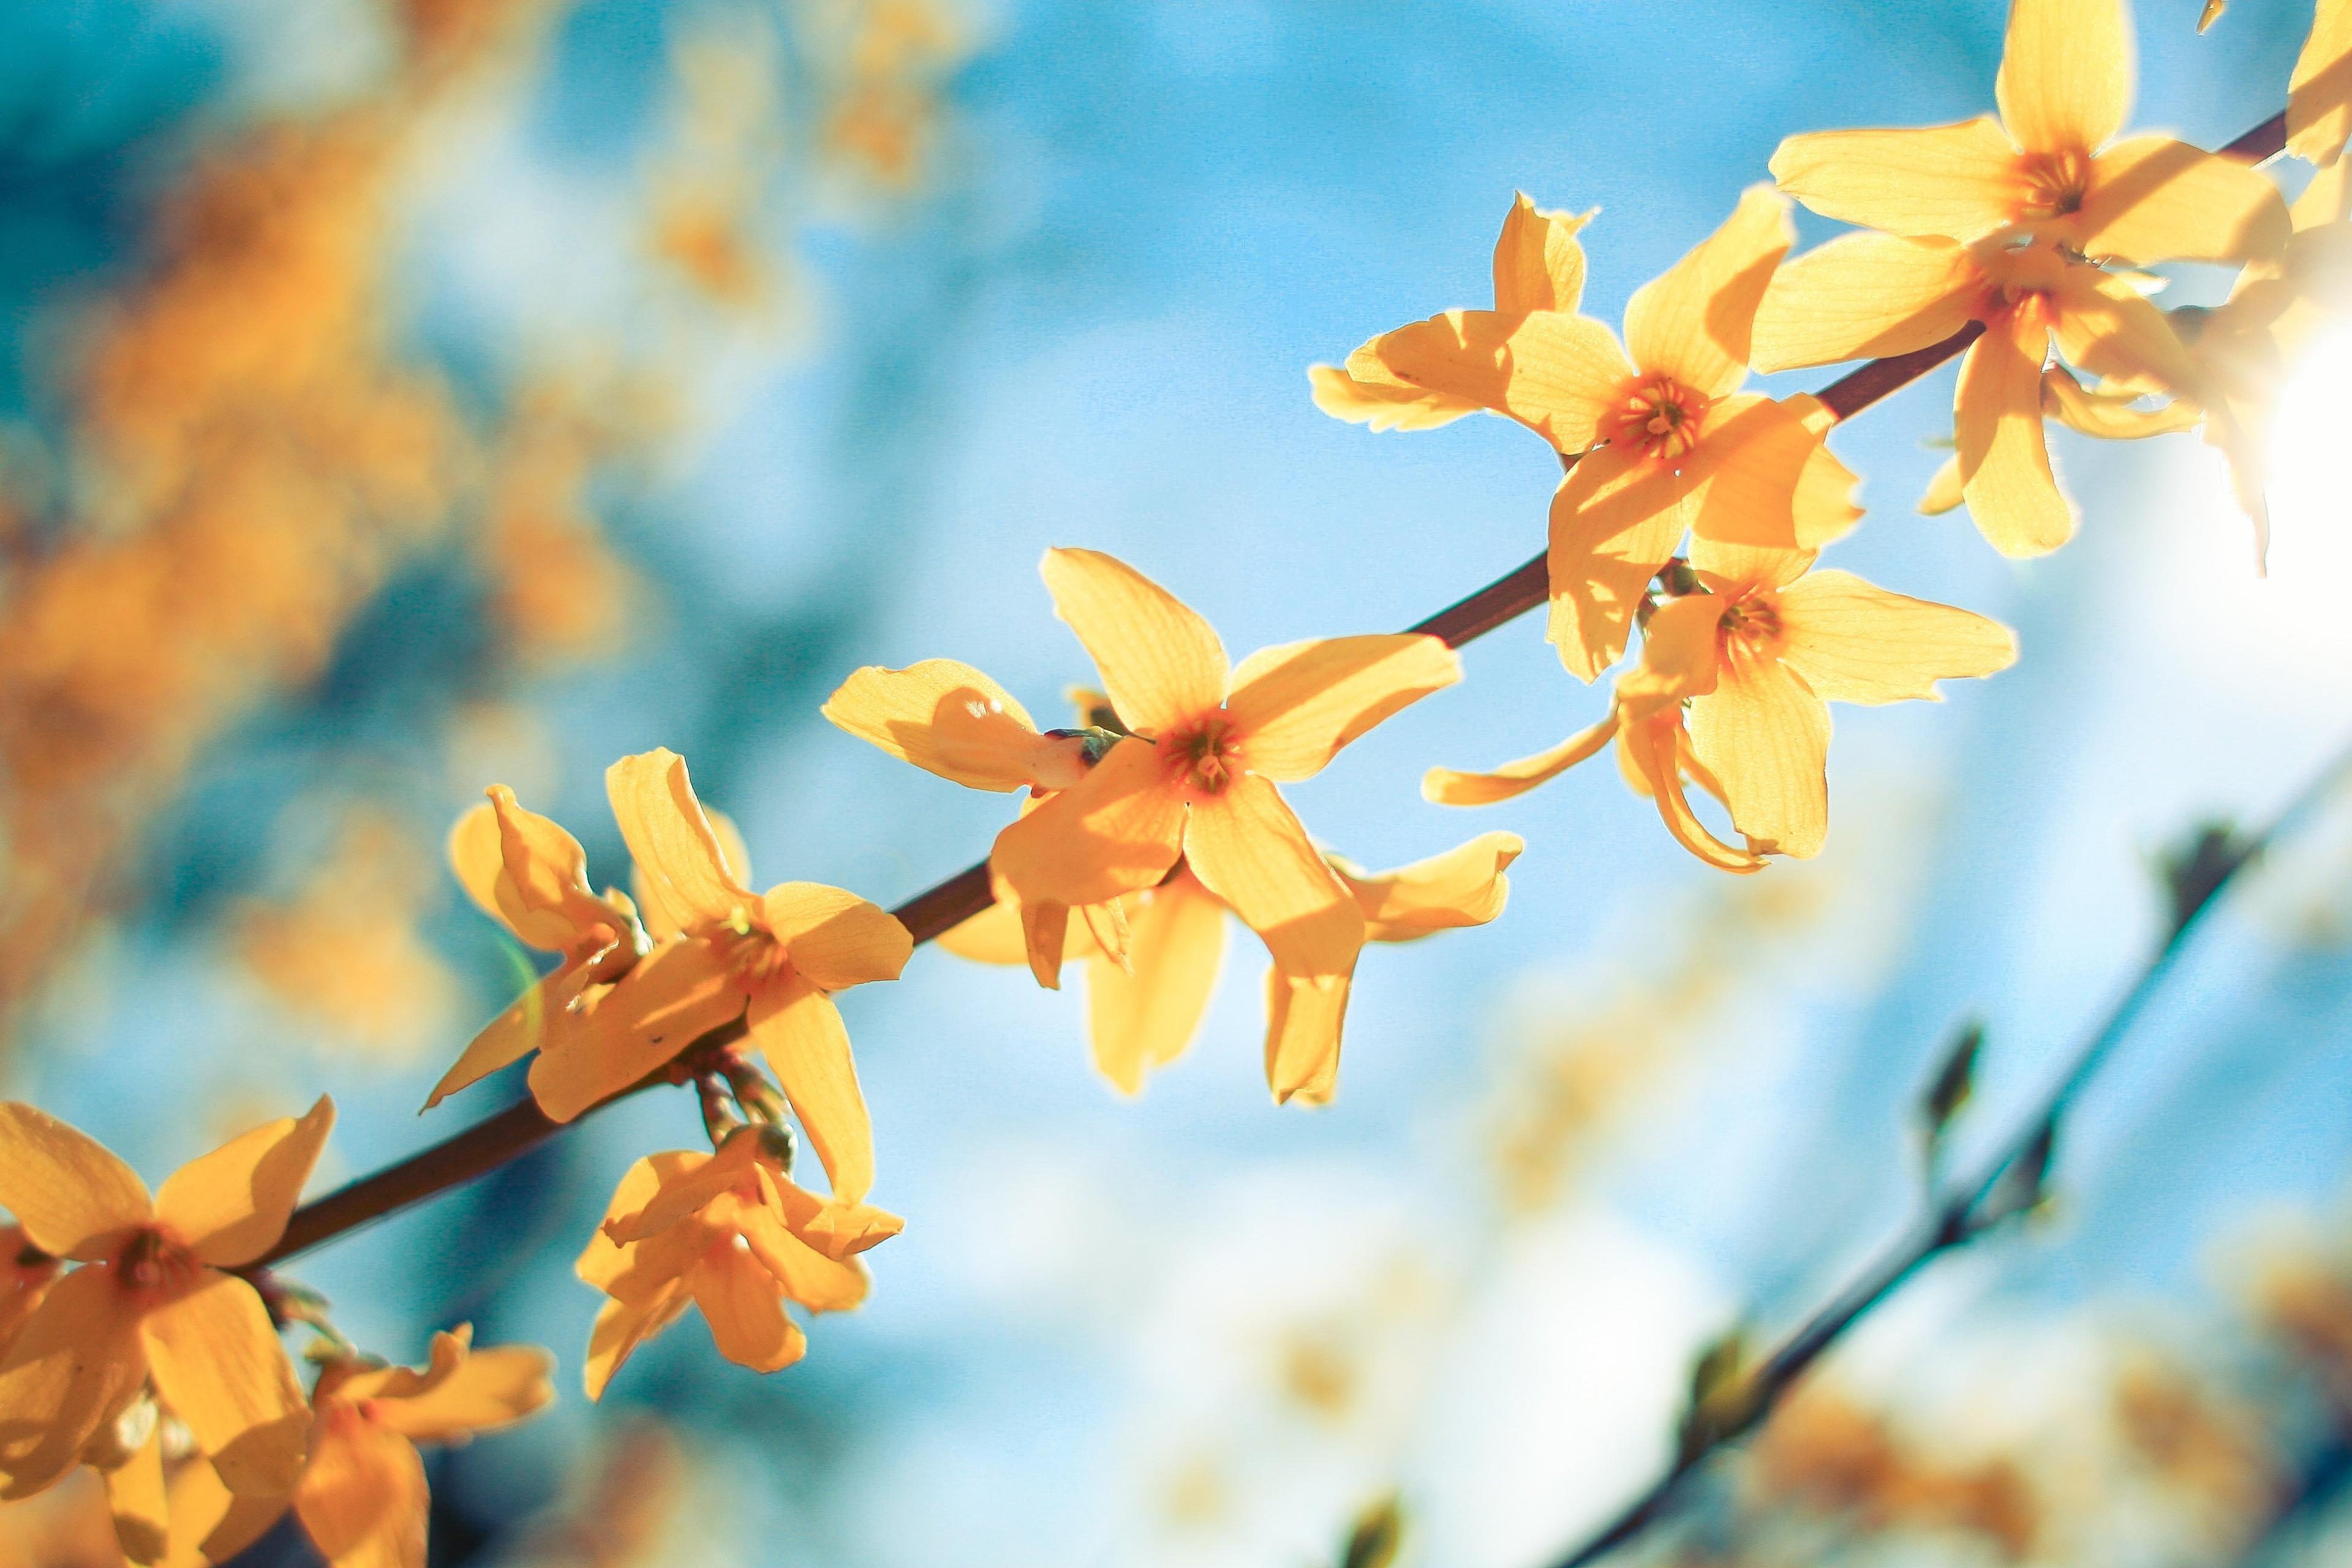 Against a blue sky, a branch with delicate yellow blossoms.